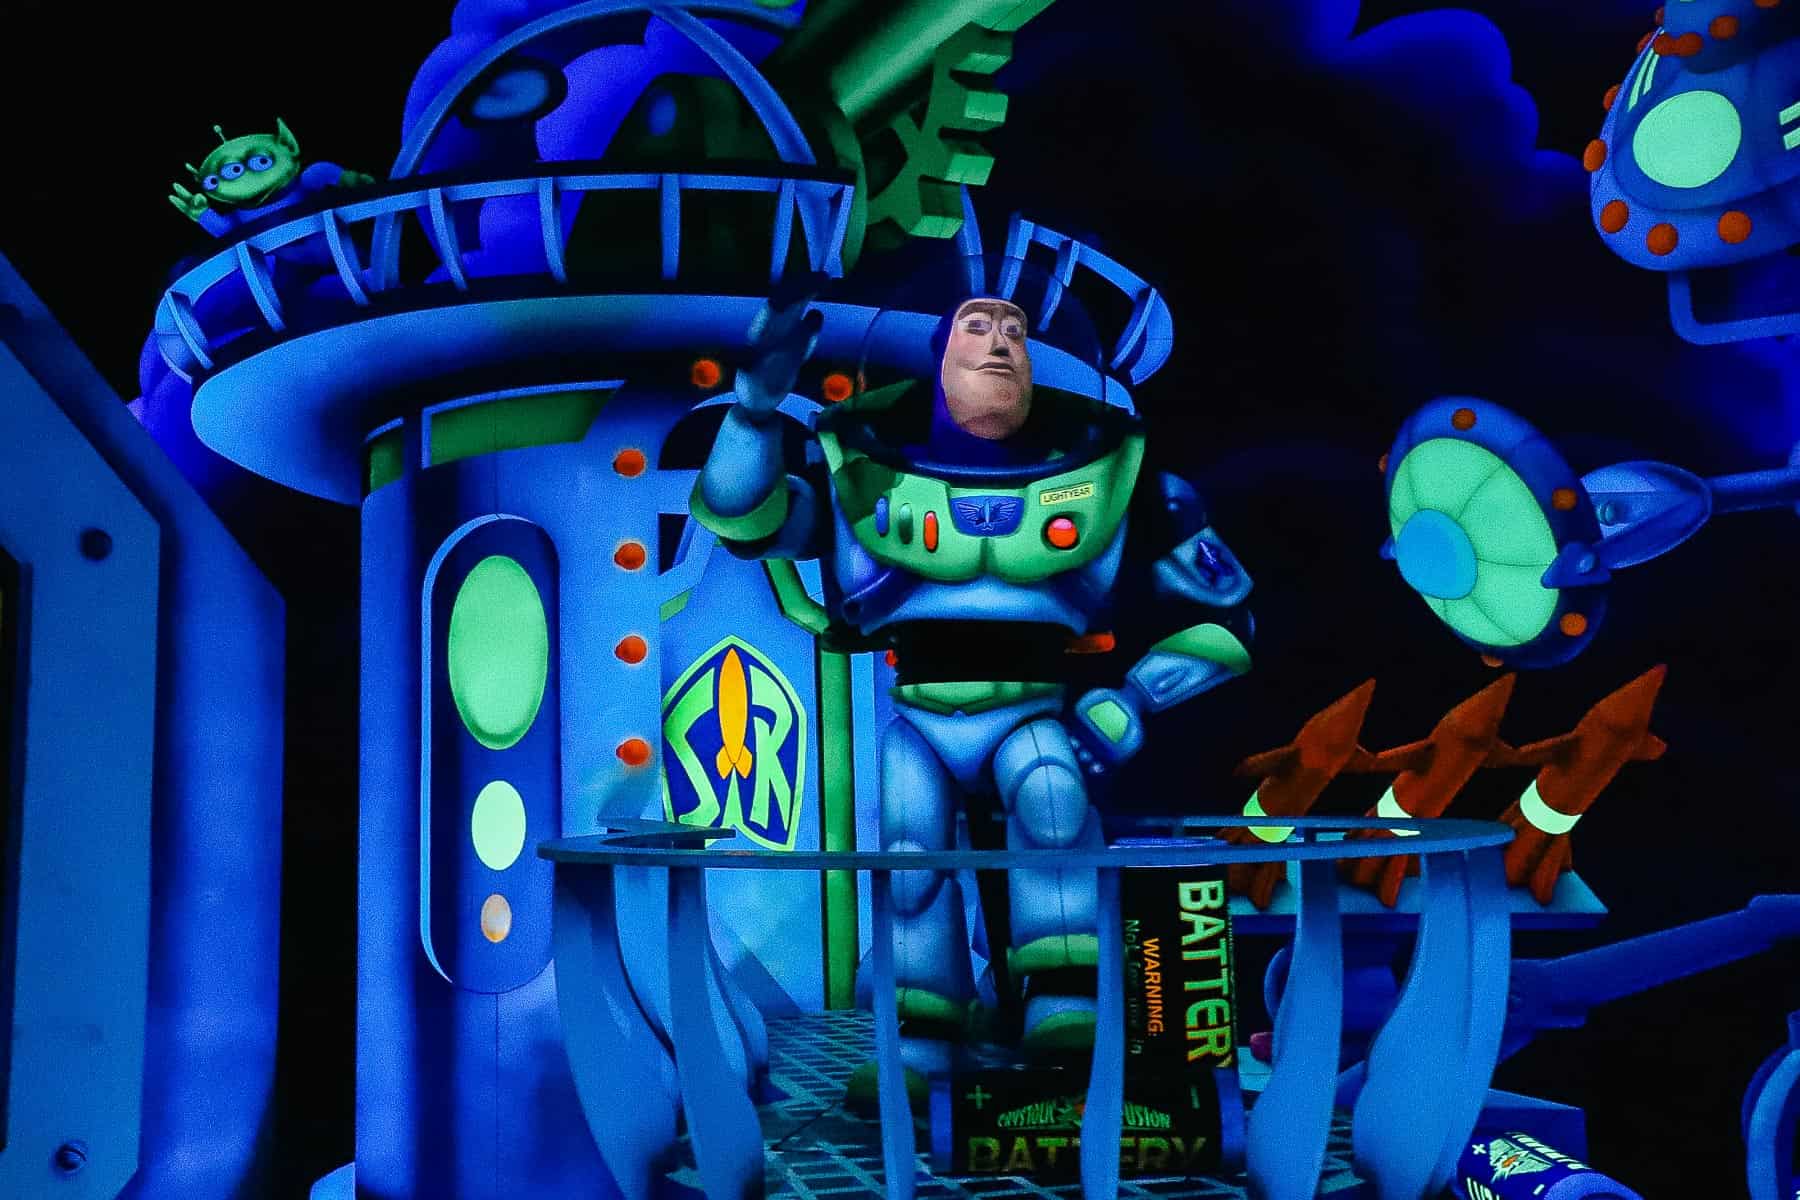 Buzz Lightyear salutes guests riding Space Ranger Spin. 